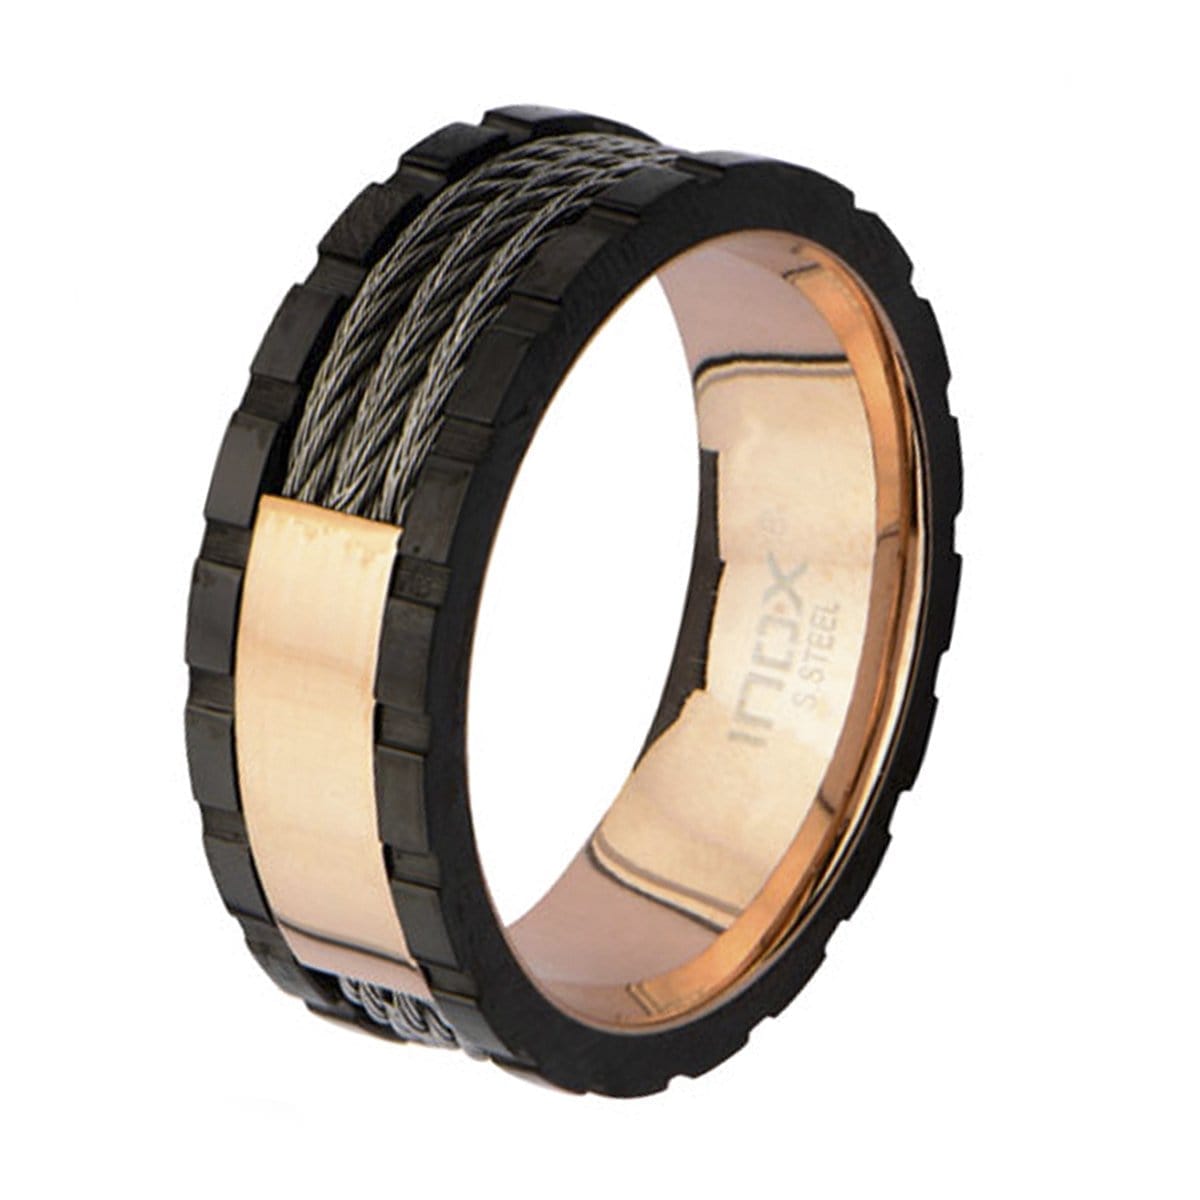 INOX JEWELRY Rings Rose Tone, Black, and Silver Tone Stainless Steel Engraveable Cable Ring